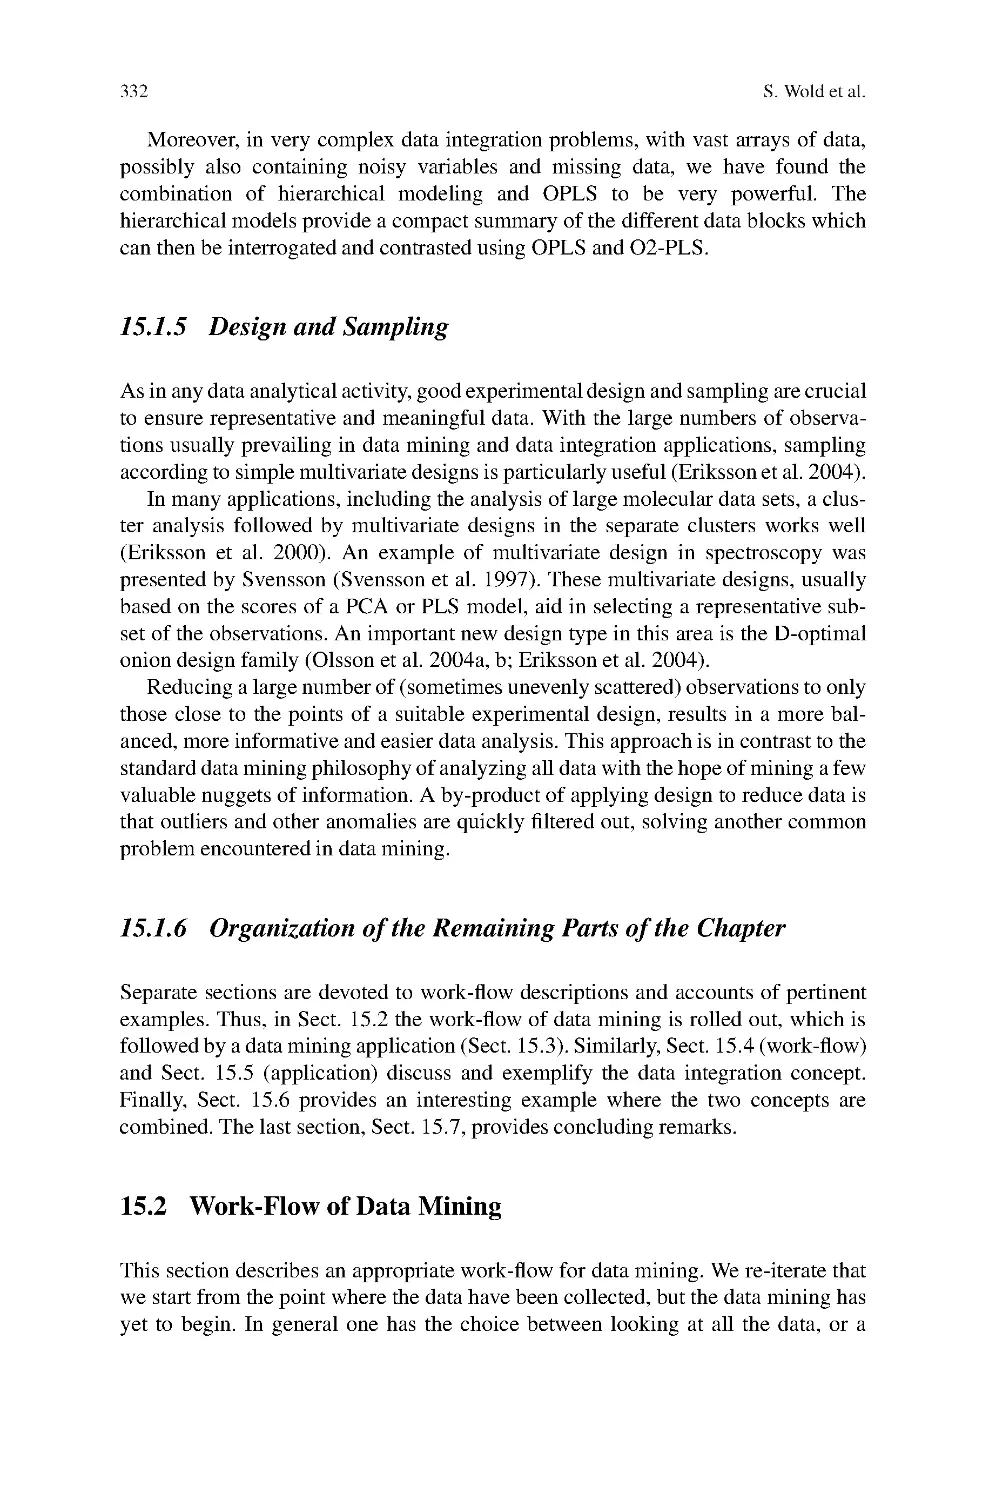 15.1.5 Design and Sampling
15.1.6 Organization of the Remaining Parts of the Chapter
15.2 Work-Flow of Data Mining